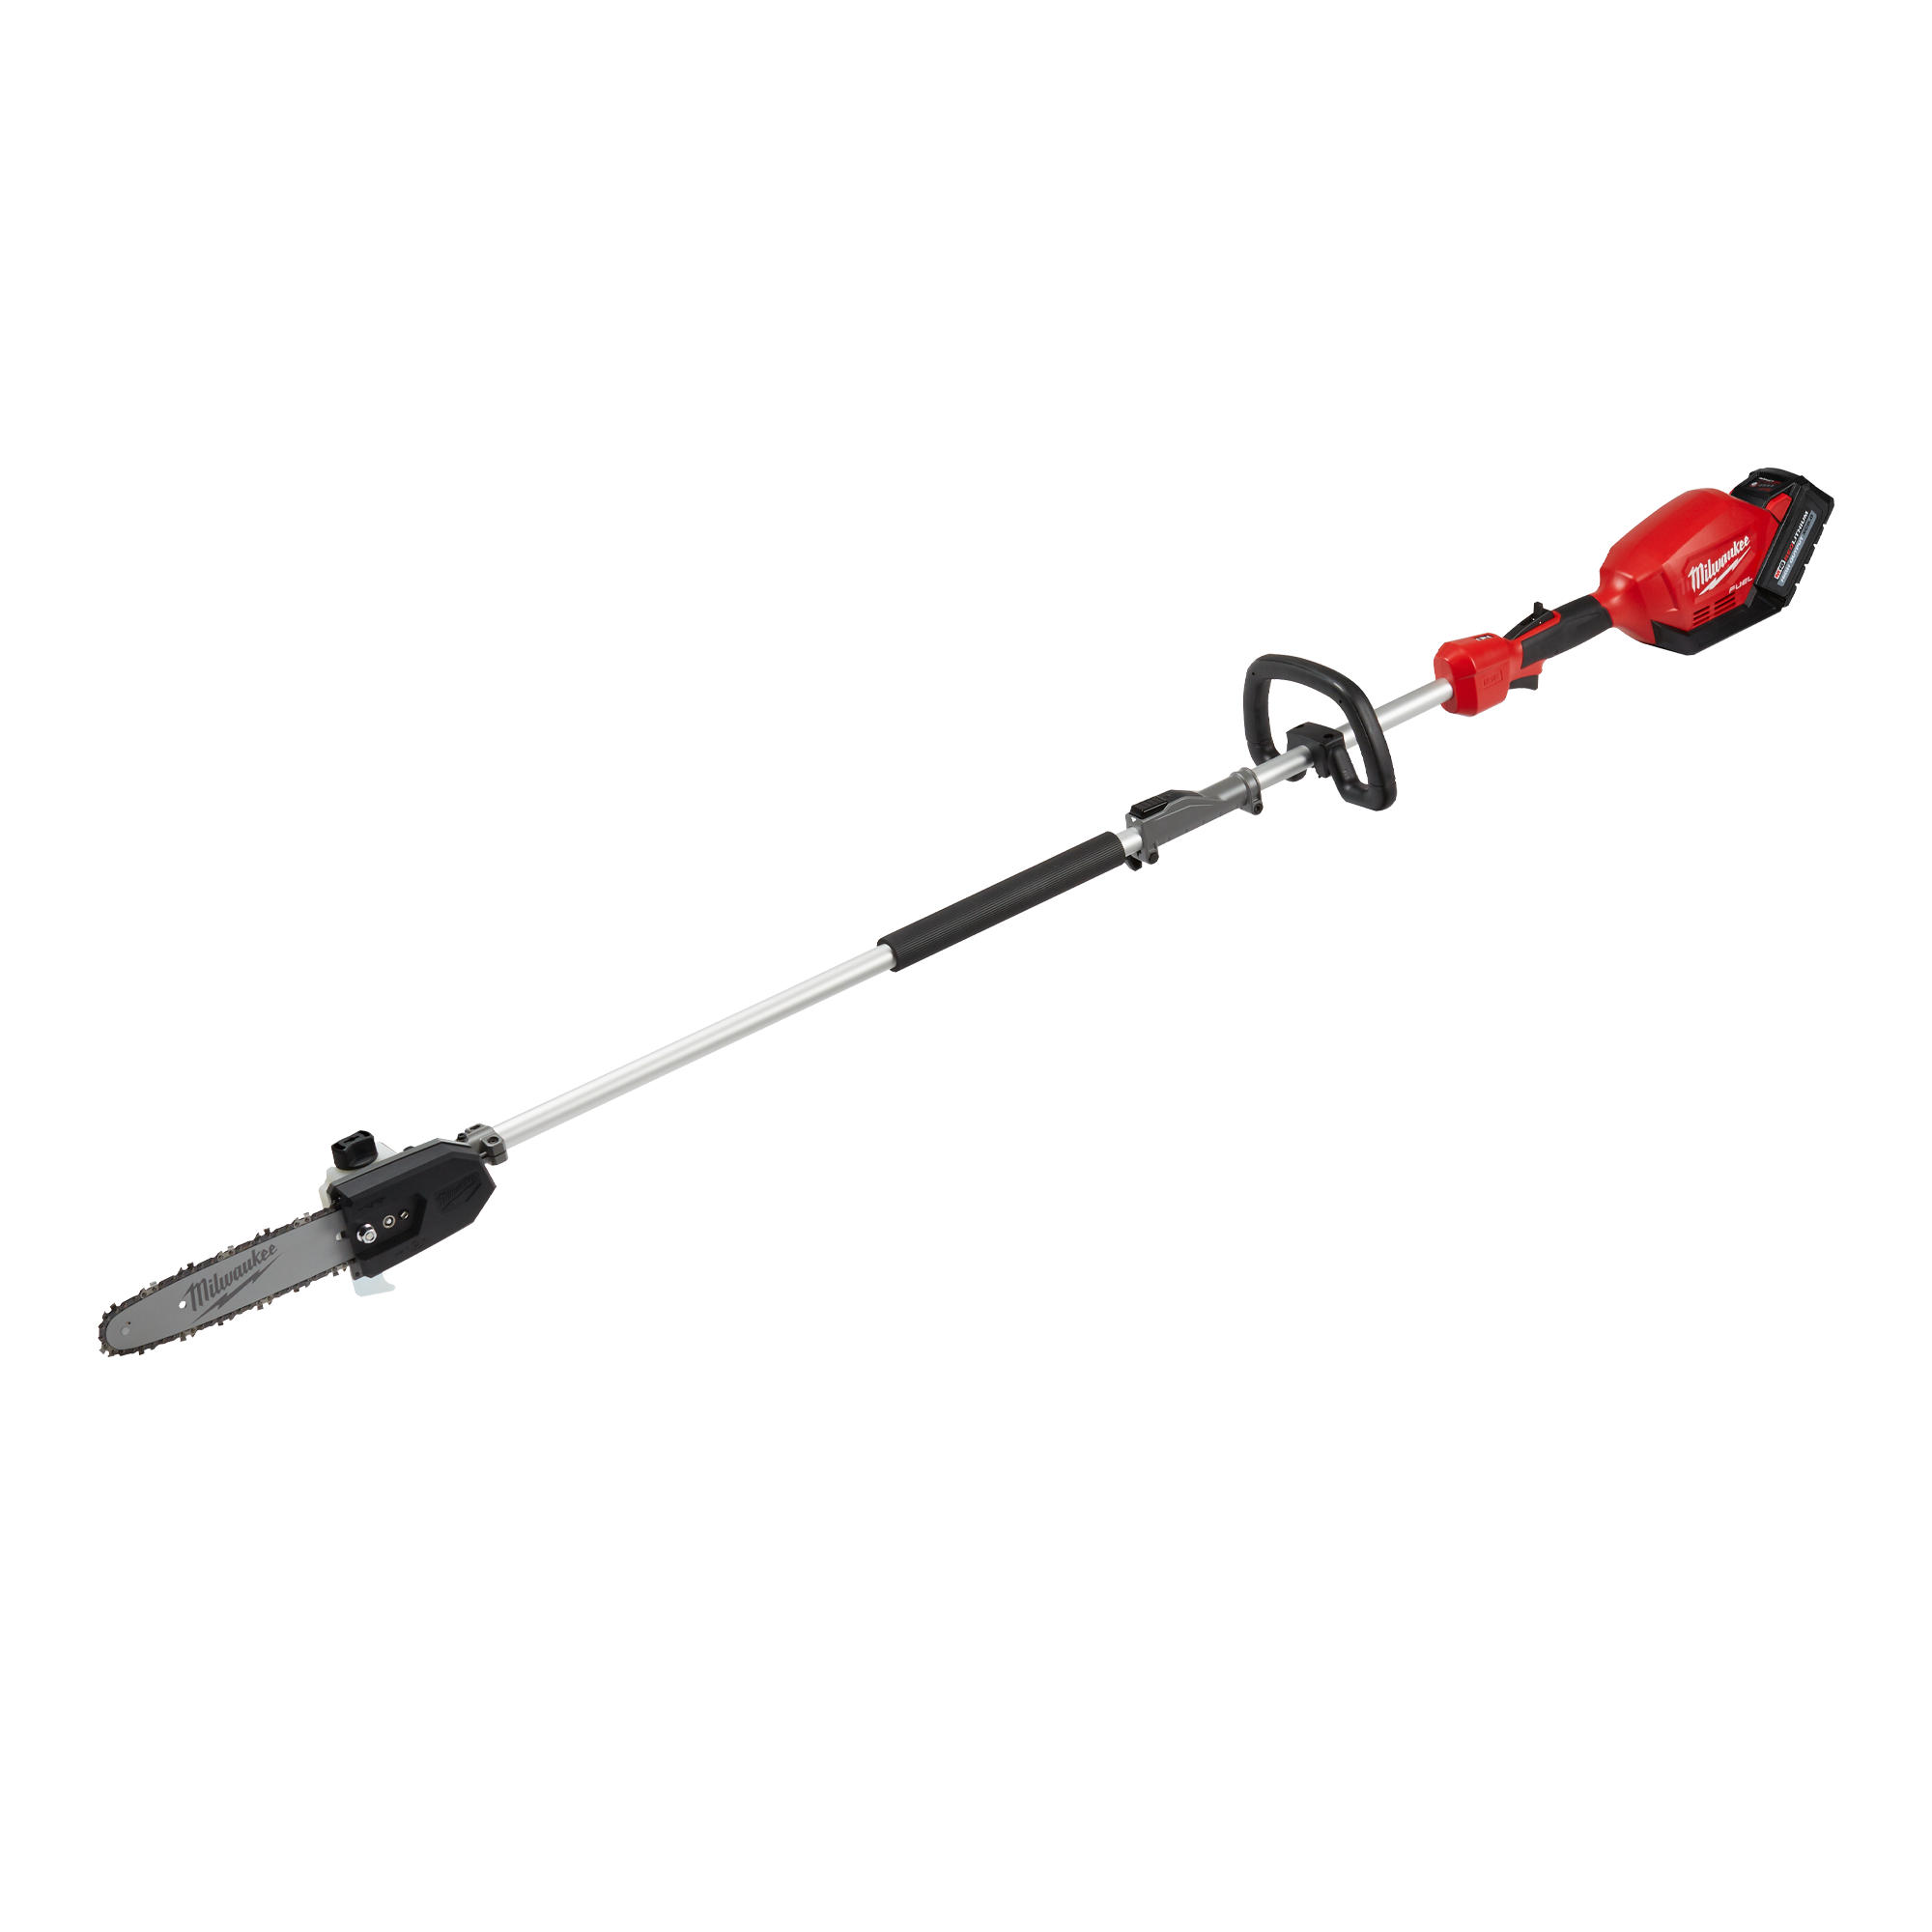 530iPT5 (tool only) Pole Saw